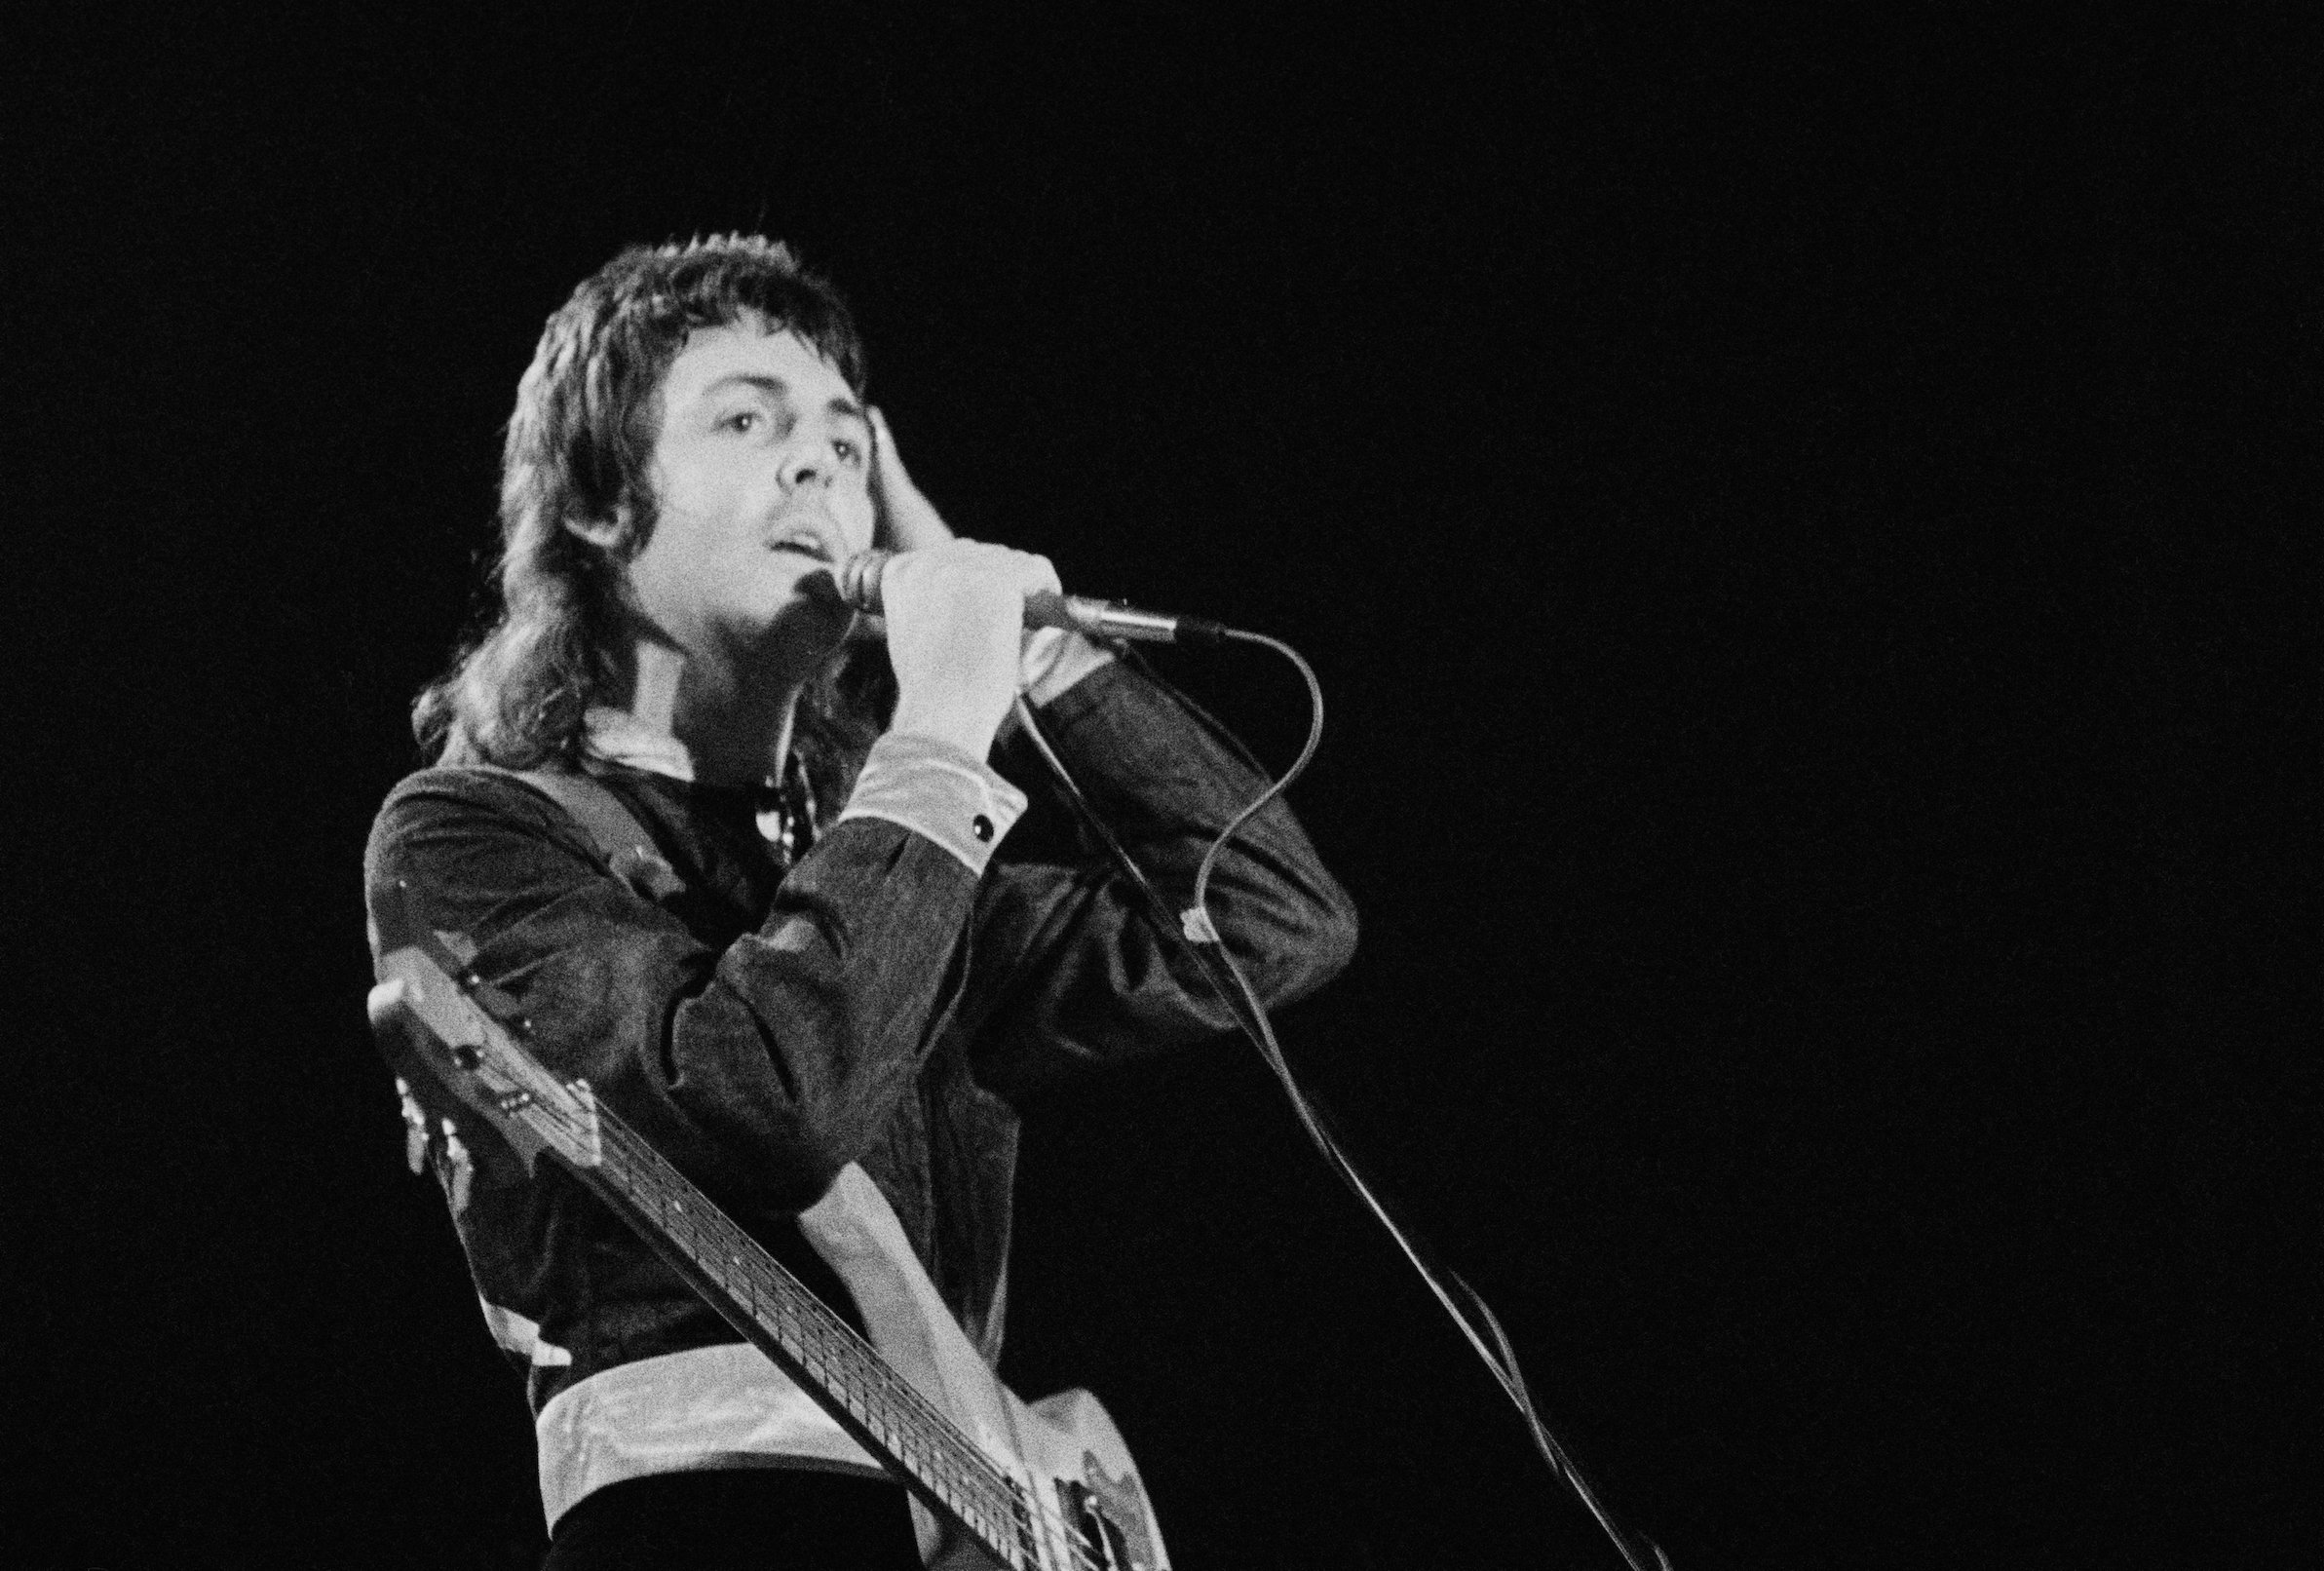 Paul McCartney performs with Wings on their 1973 U.K. tour